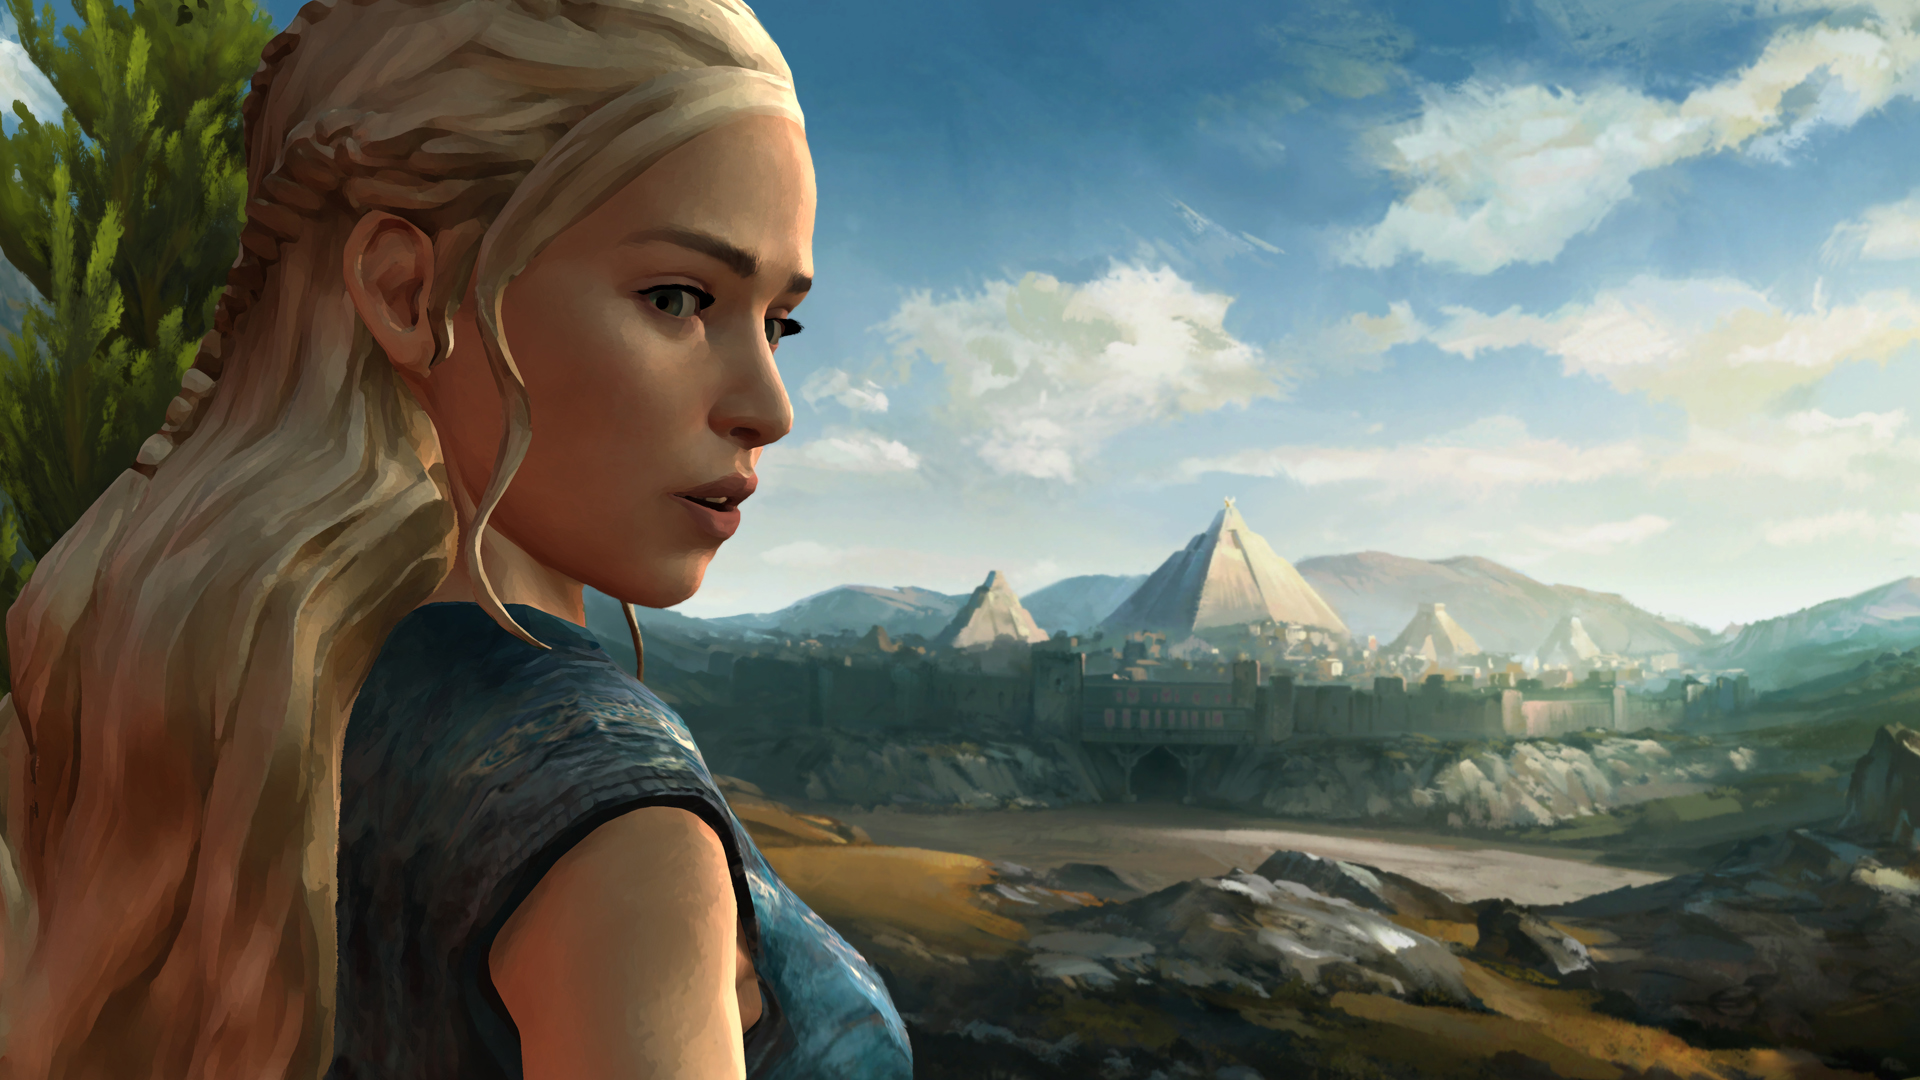 Download Game Of Thrones A Telltale Games Series Full Pc Game